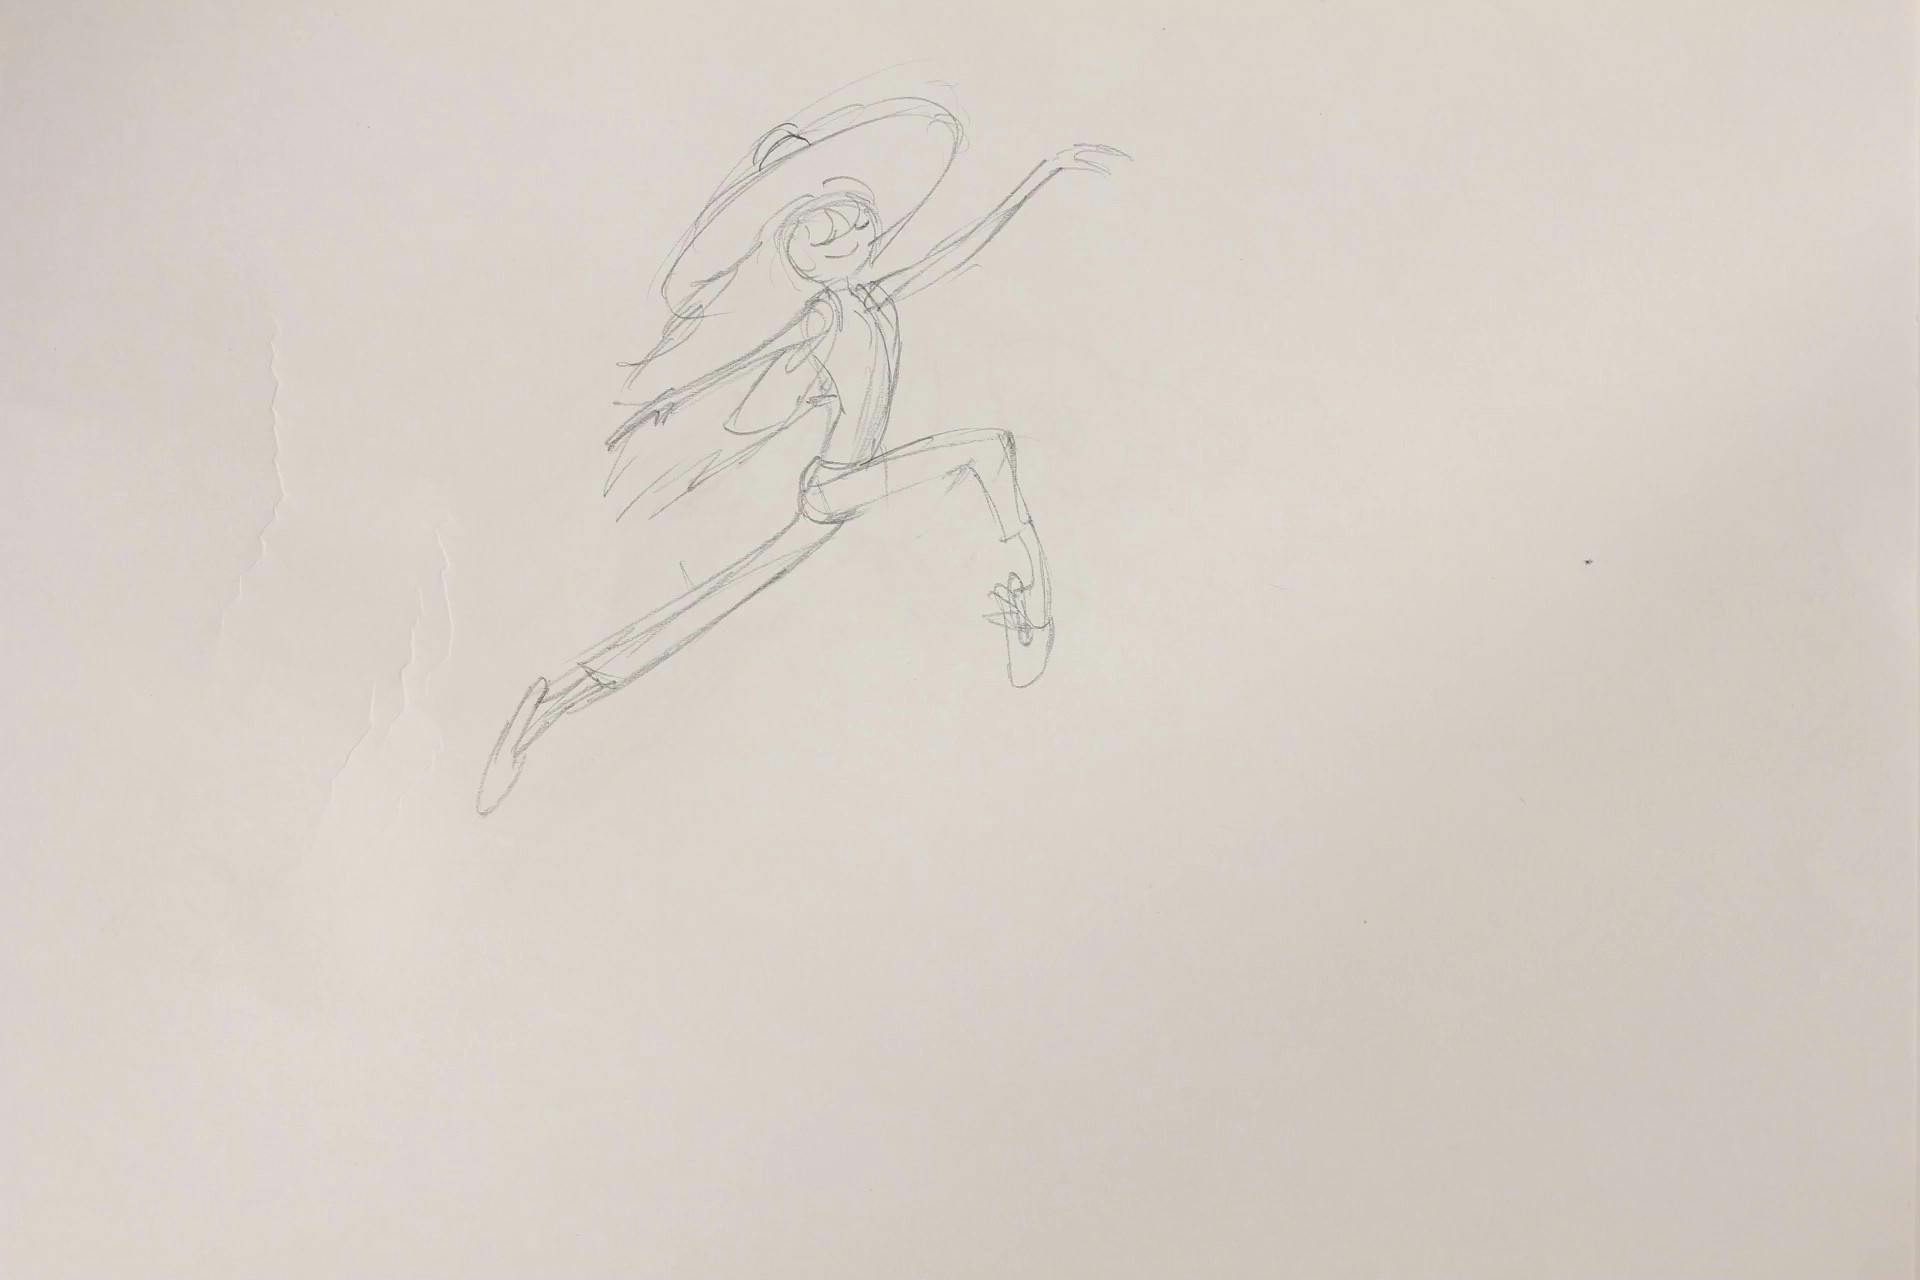 drawing of a person leaping through the air